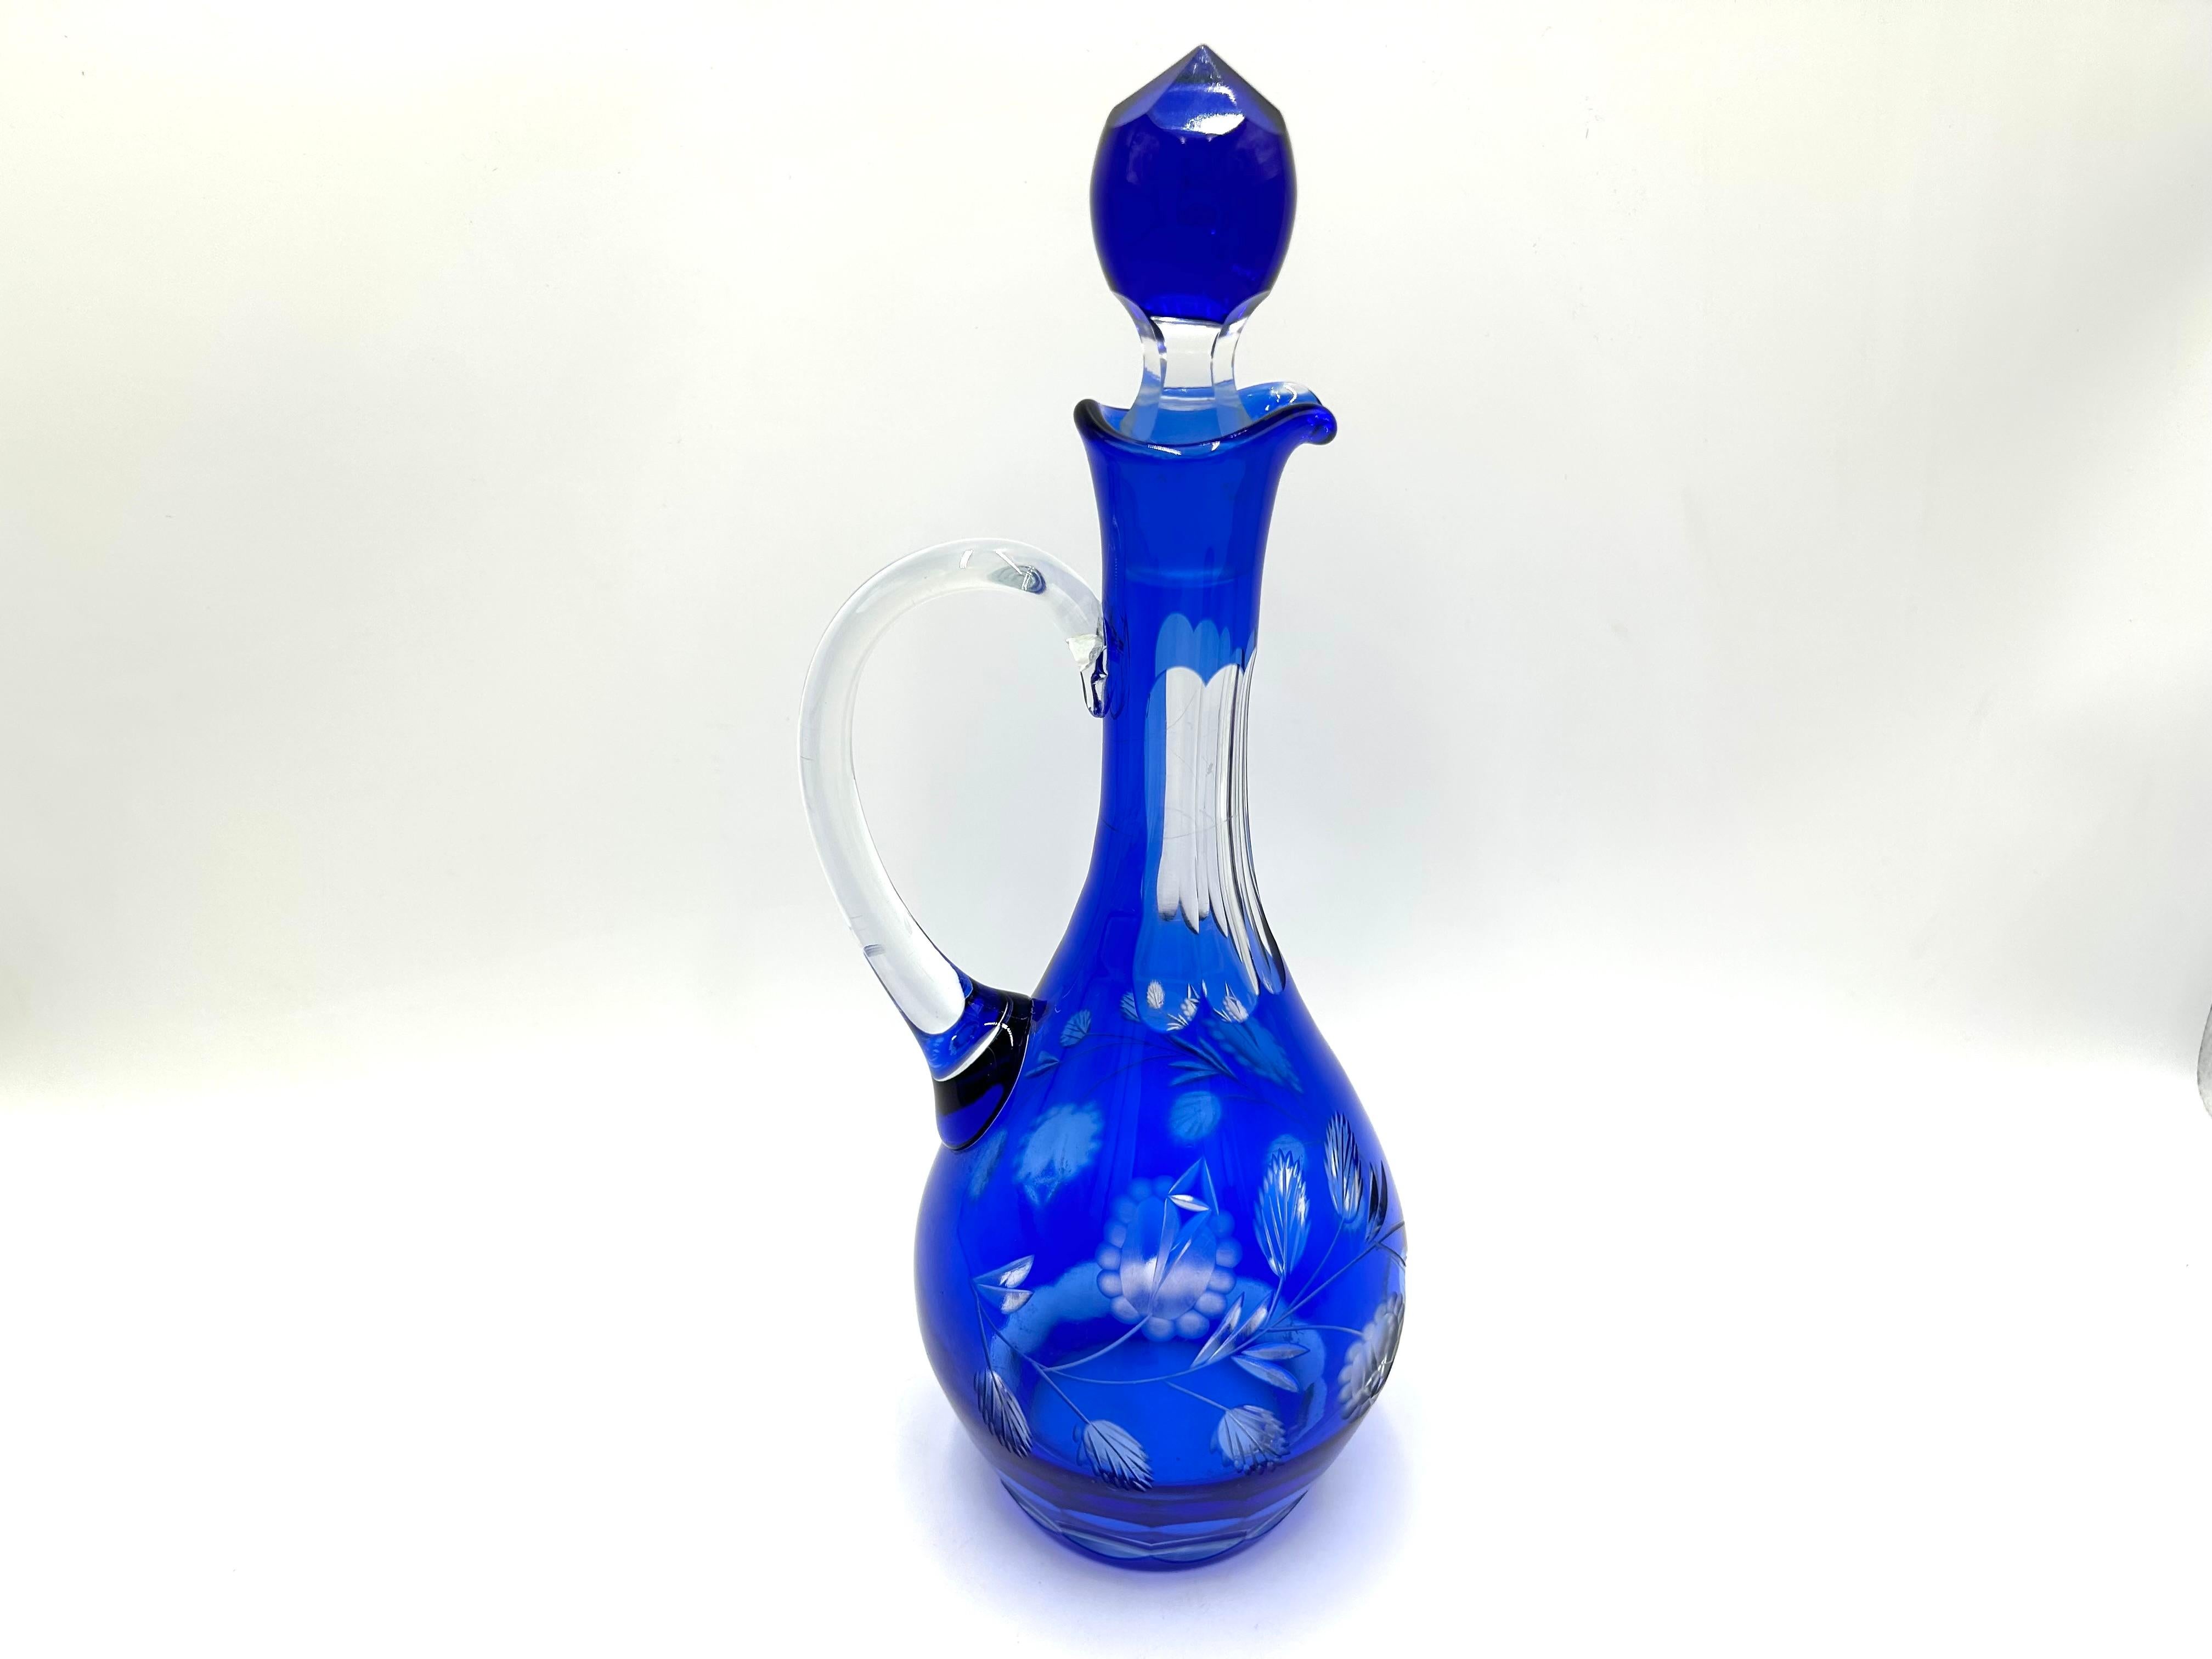 Crystal carafe in cobalt color decorated with cuts with a floral motif

Made in Poland in the 1960s.

Very good condition, no damage

height: 36cm, width 14cm, depth 13cm